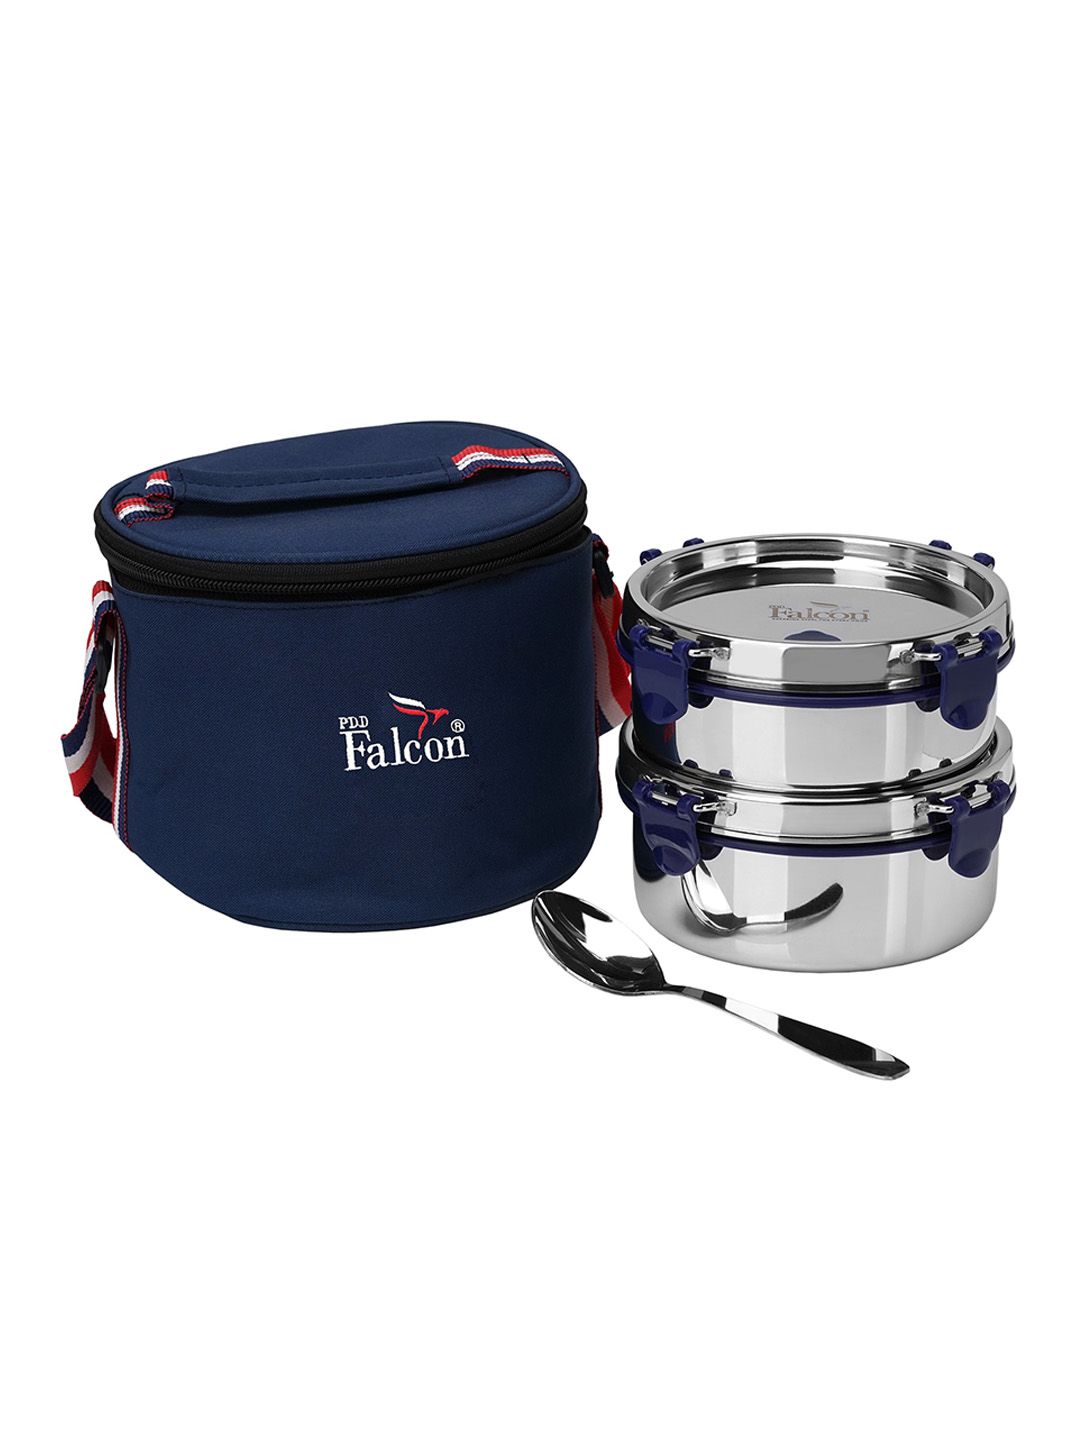 PDDFALCON Blue Stainless Steel Eco Nxt Dishwasher Safe Lunch Box Price in India